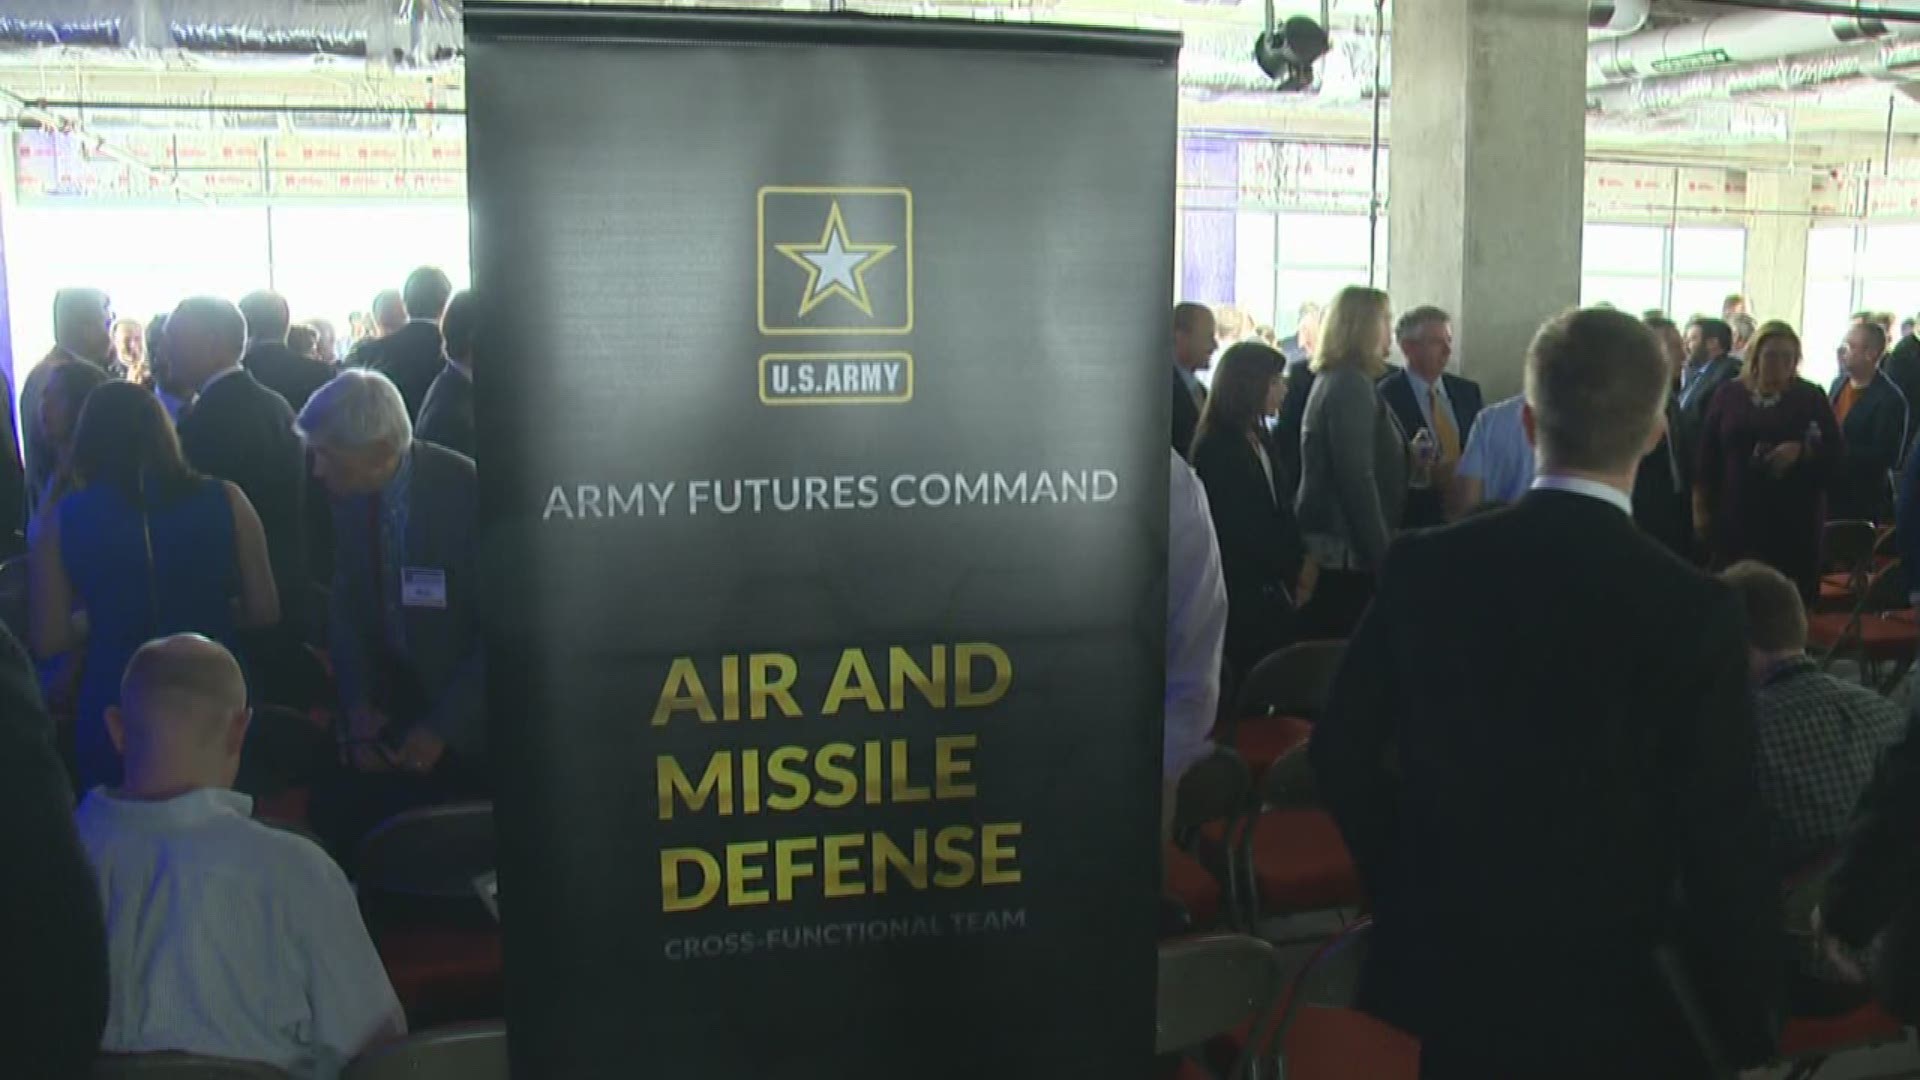 The Army picked Austin because it's home to top-tier academics and innovations.